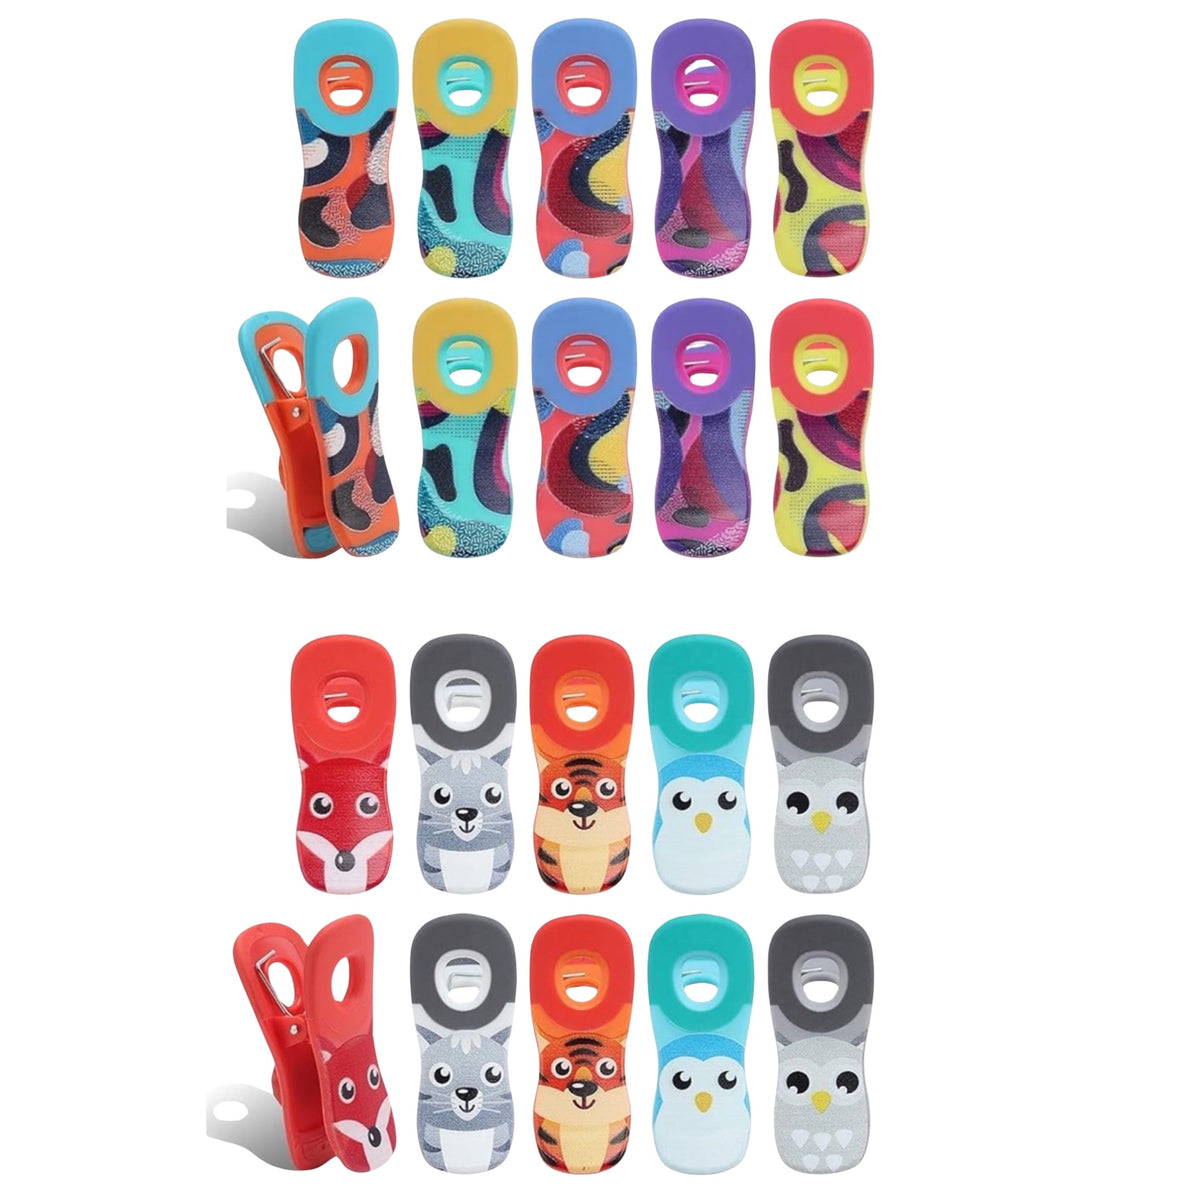 10pc Magnetic Bag Chip Clip Set w/ Strong Hold- Bright Colors & Cute Animals